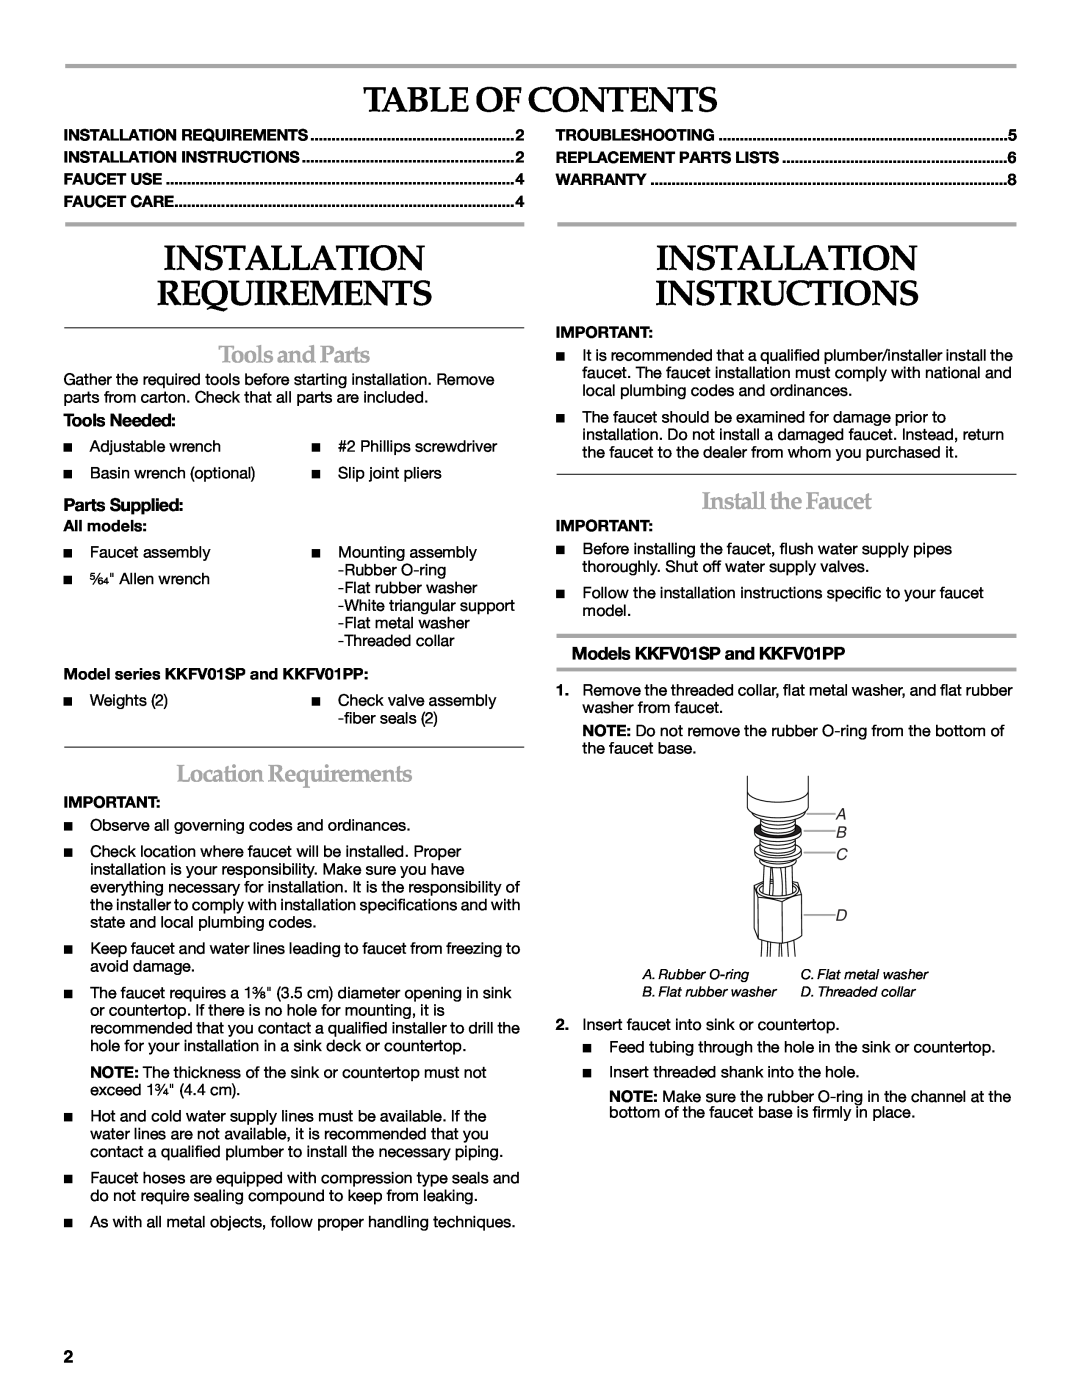 KitchenAid KKFV01PP Series Table Of Contents, Installation Requirements, Installation Instructions, ToolsandParts 